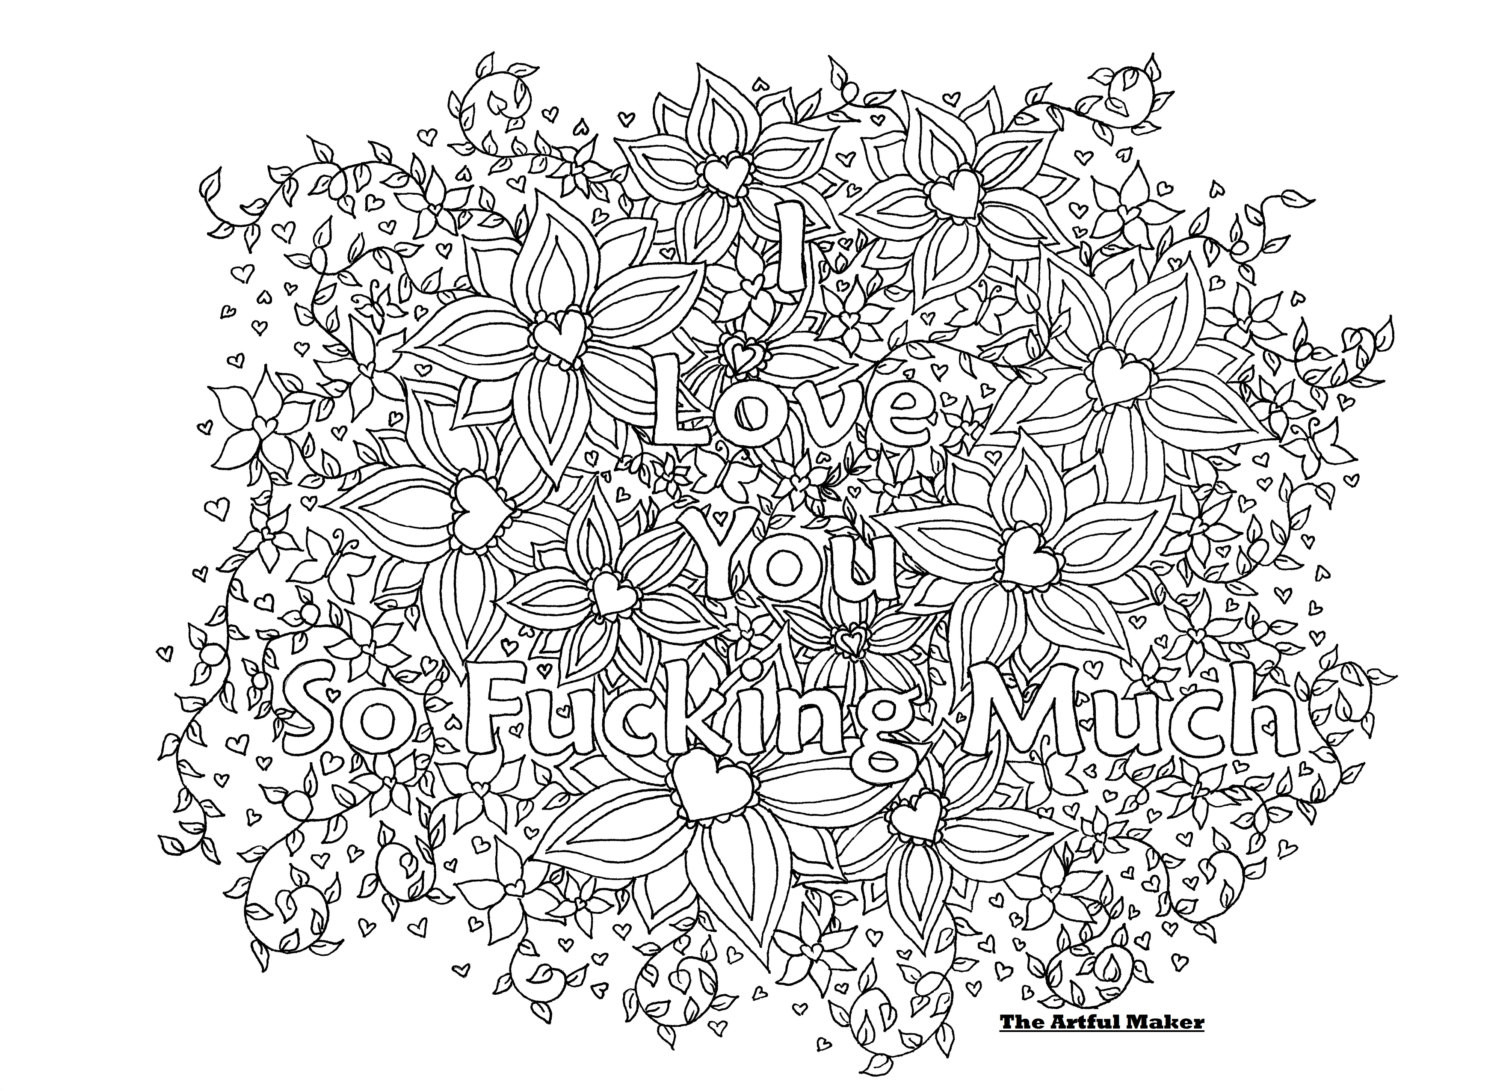 Coloring Pages For Adults Love
 I Love You So Fucking Much Adult Coloring Page by The Artful